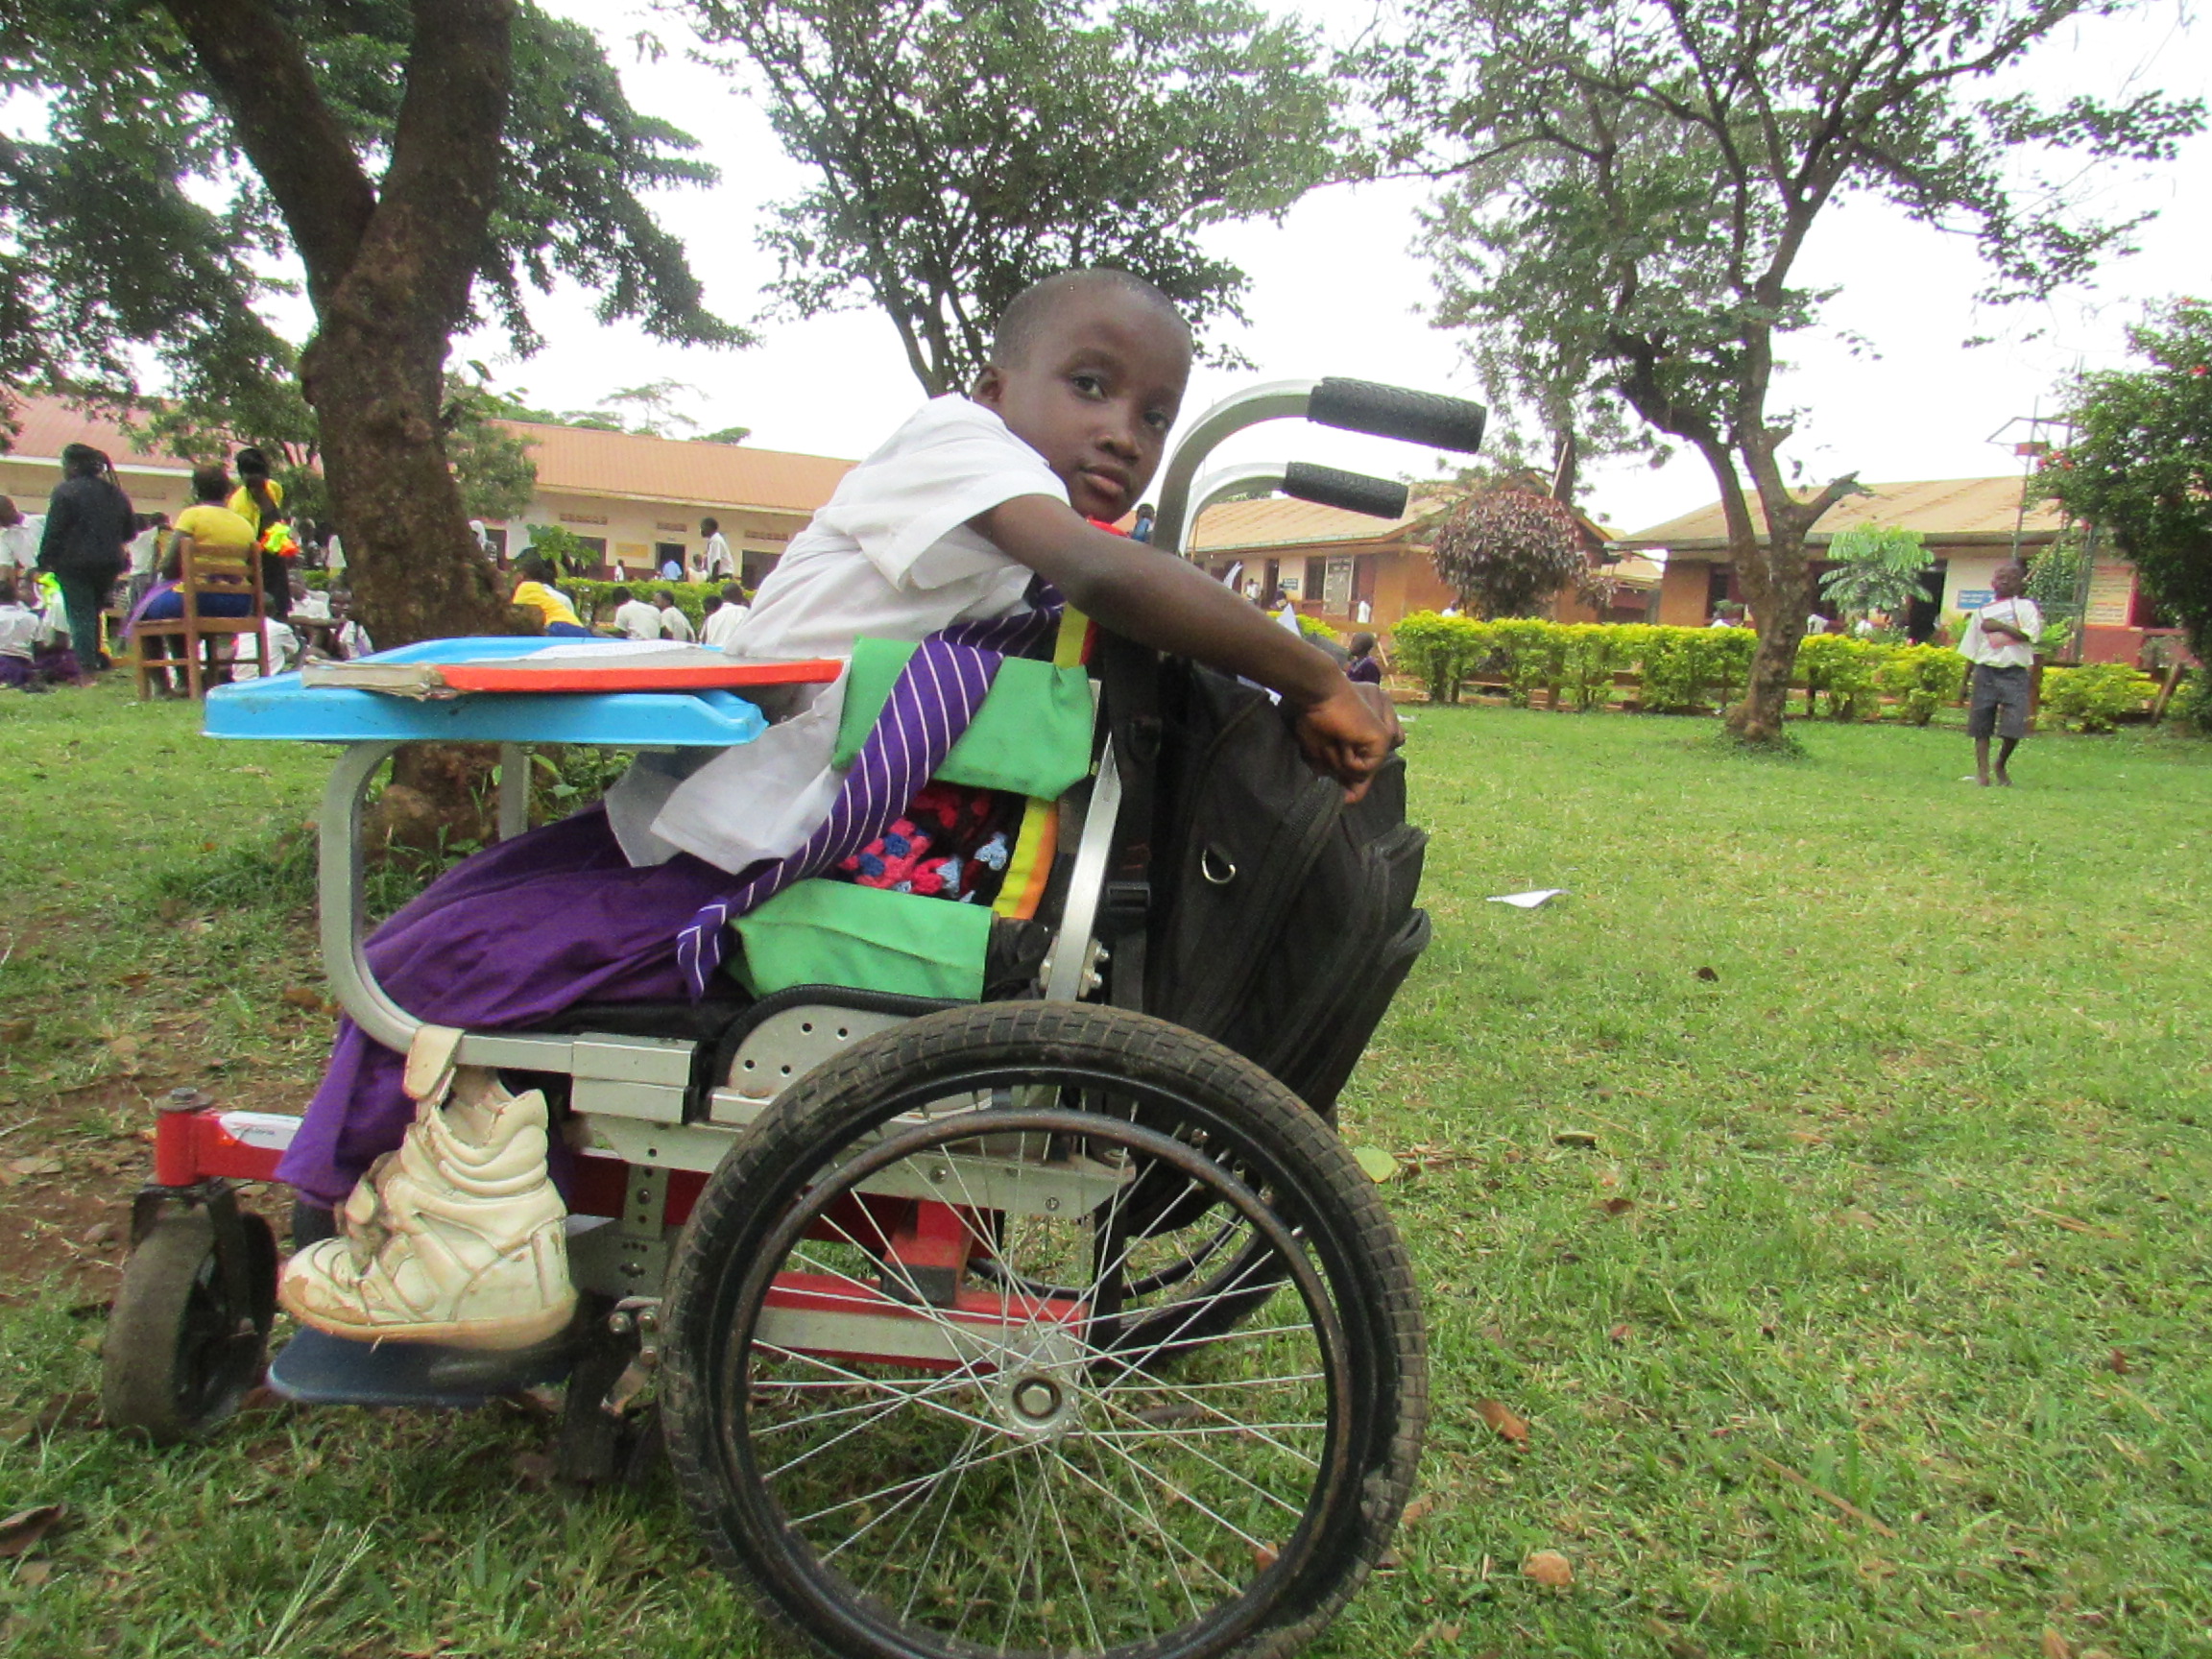 Benitah also uses her wheelchair to carry her school bag.